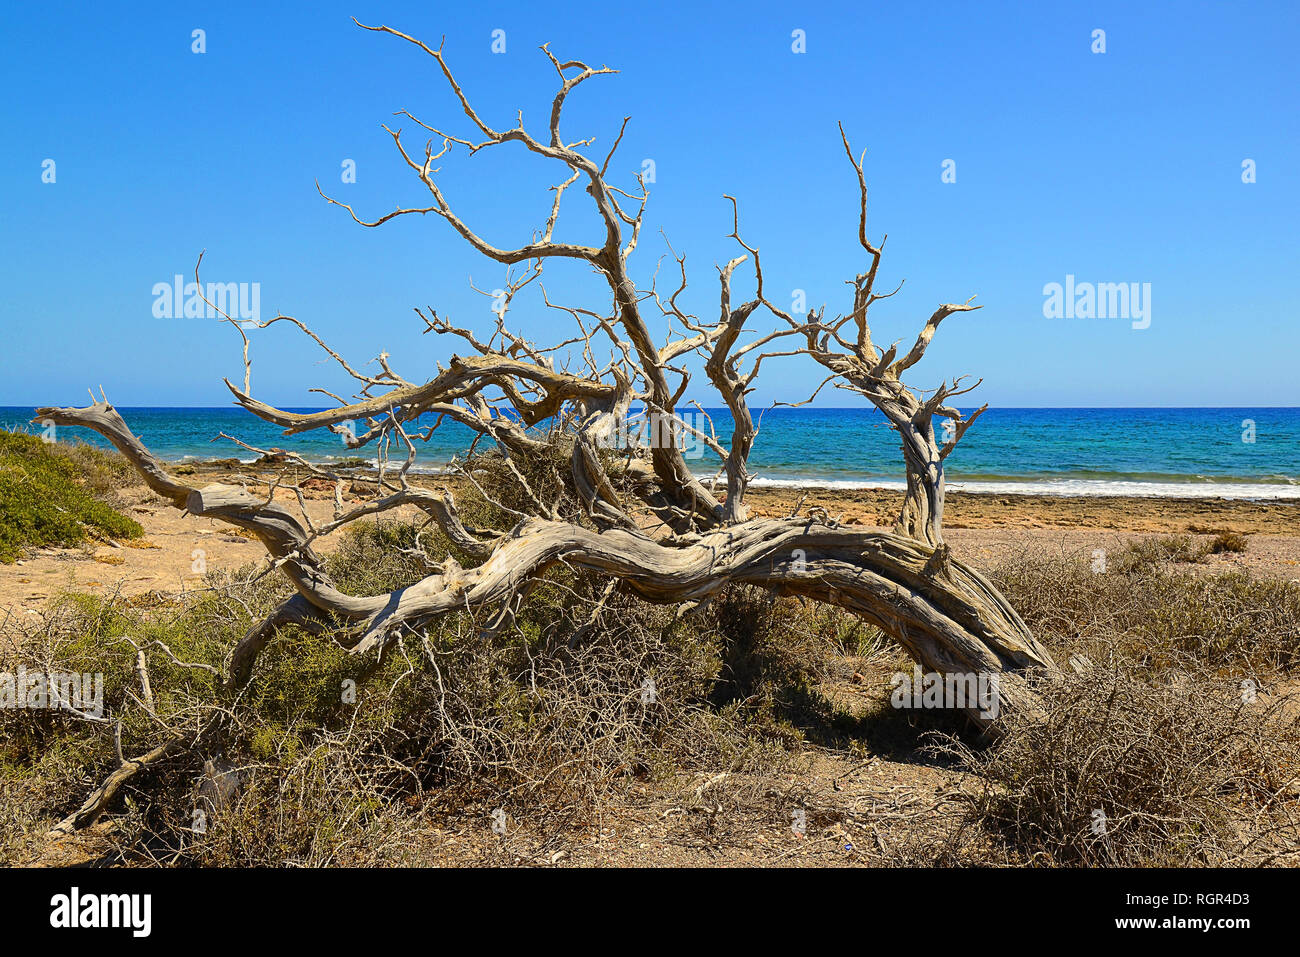 a large winding snag lying on the sand, followed by the seashore Stock Photo